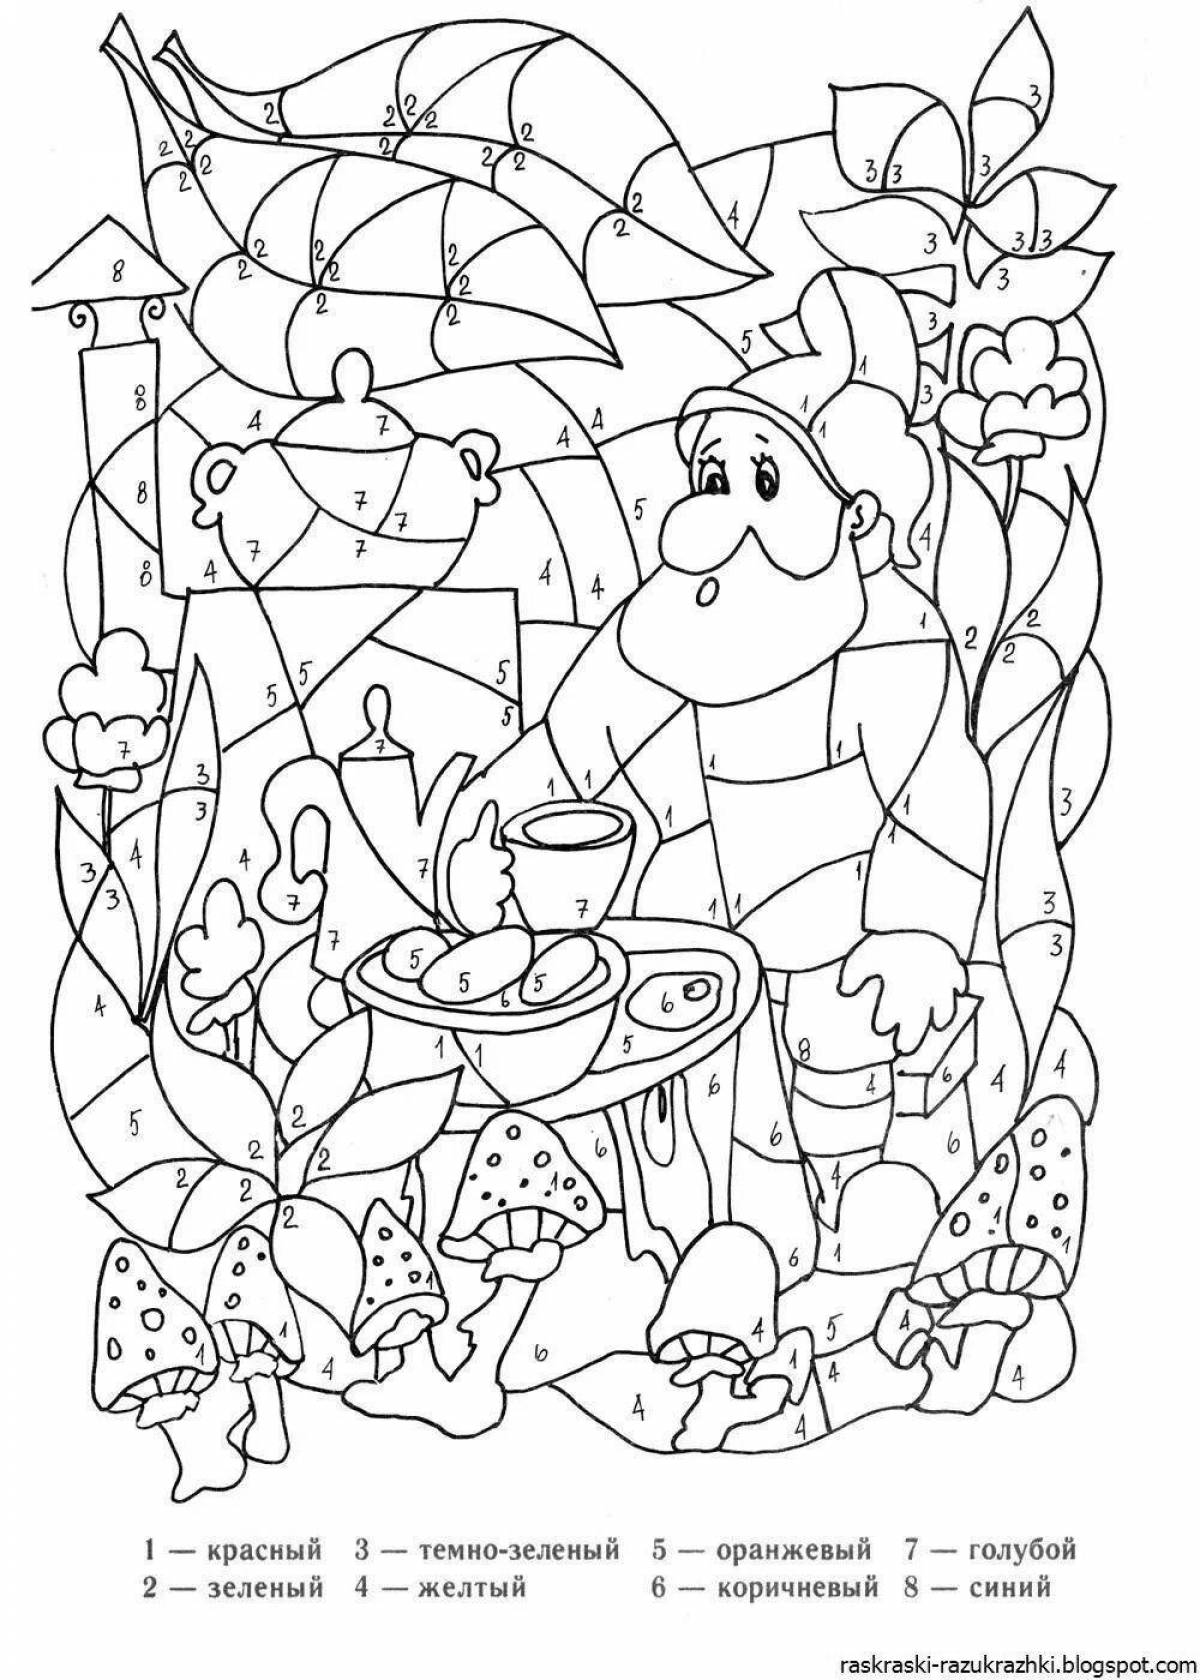 Creative unusual coloring book for kids